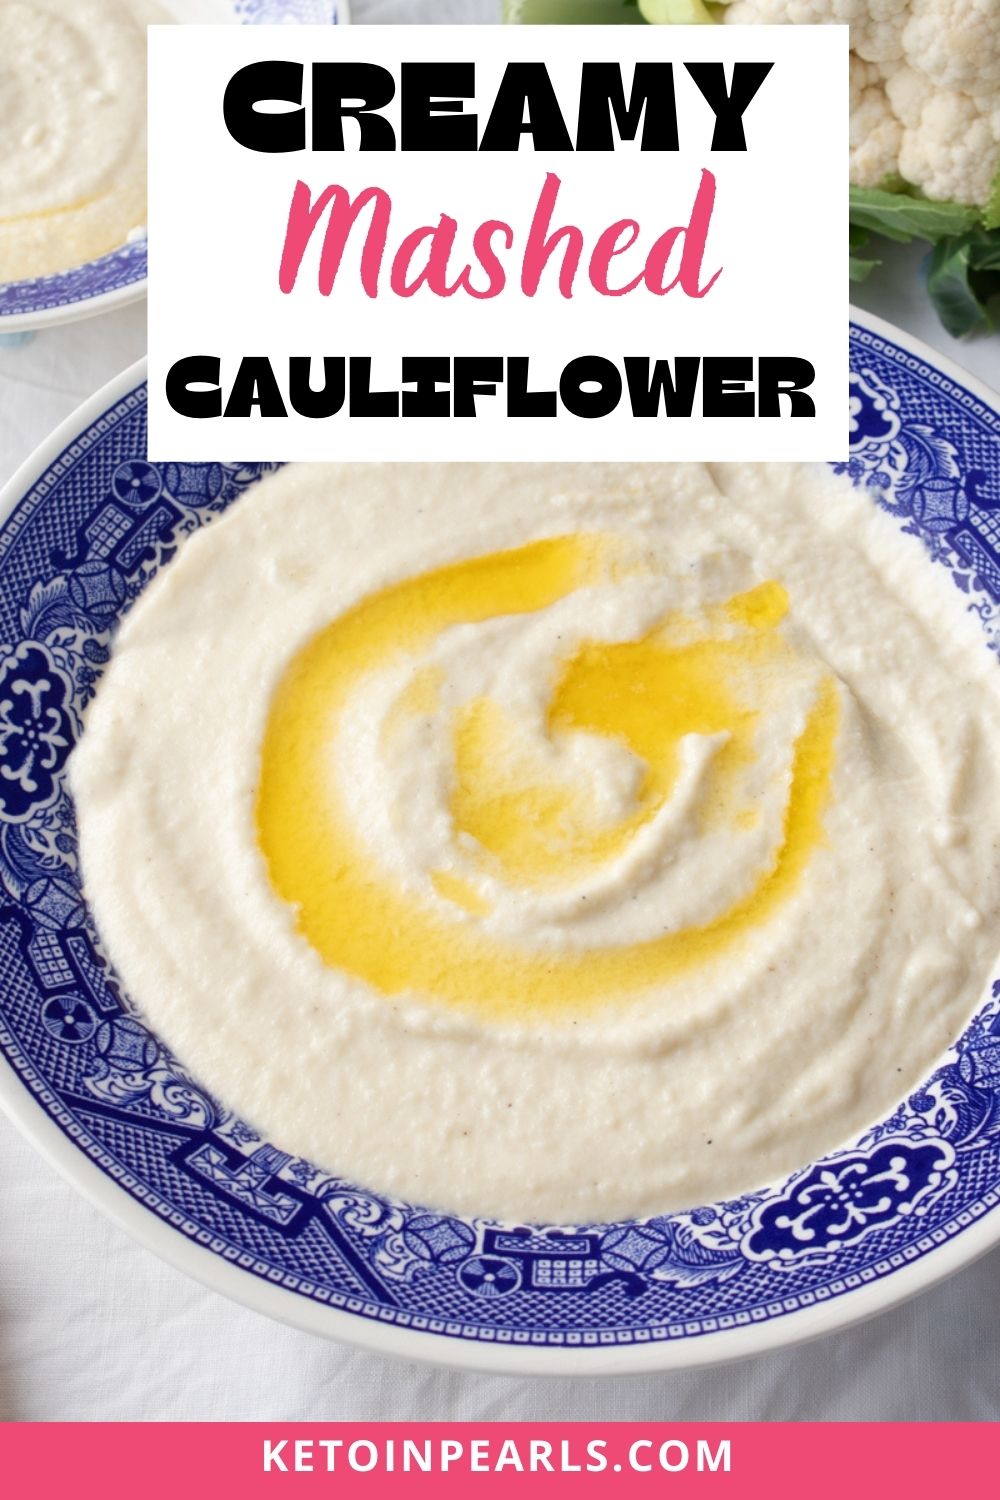 There's no need to worry about lumpy, stinky, or bland mashed cauliflower anymore with the help of this tutorial. You'll learn how to make the best mashed cauliflower recipe that's creamy and buttery, ready in 15 minutes, with no cooking required!